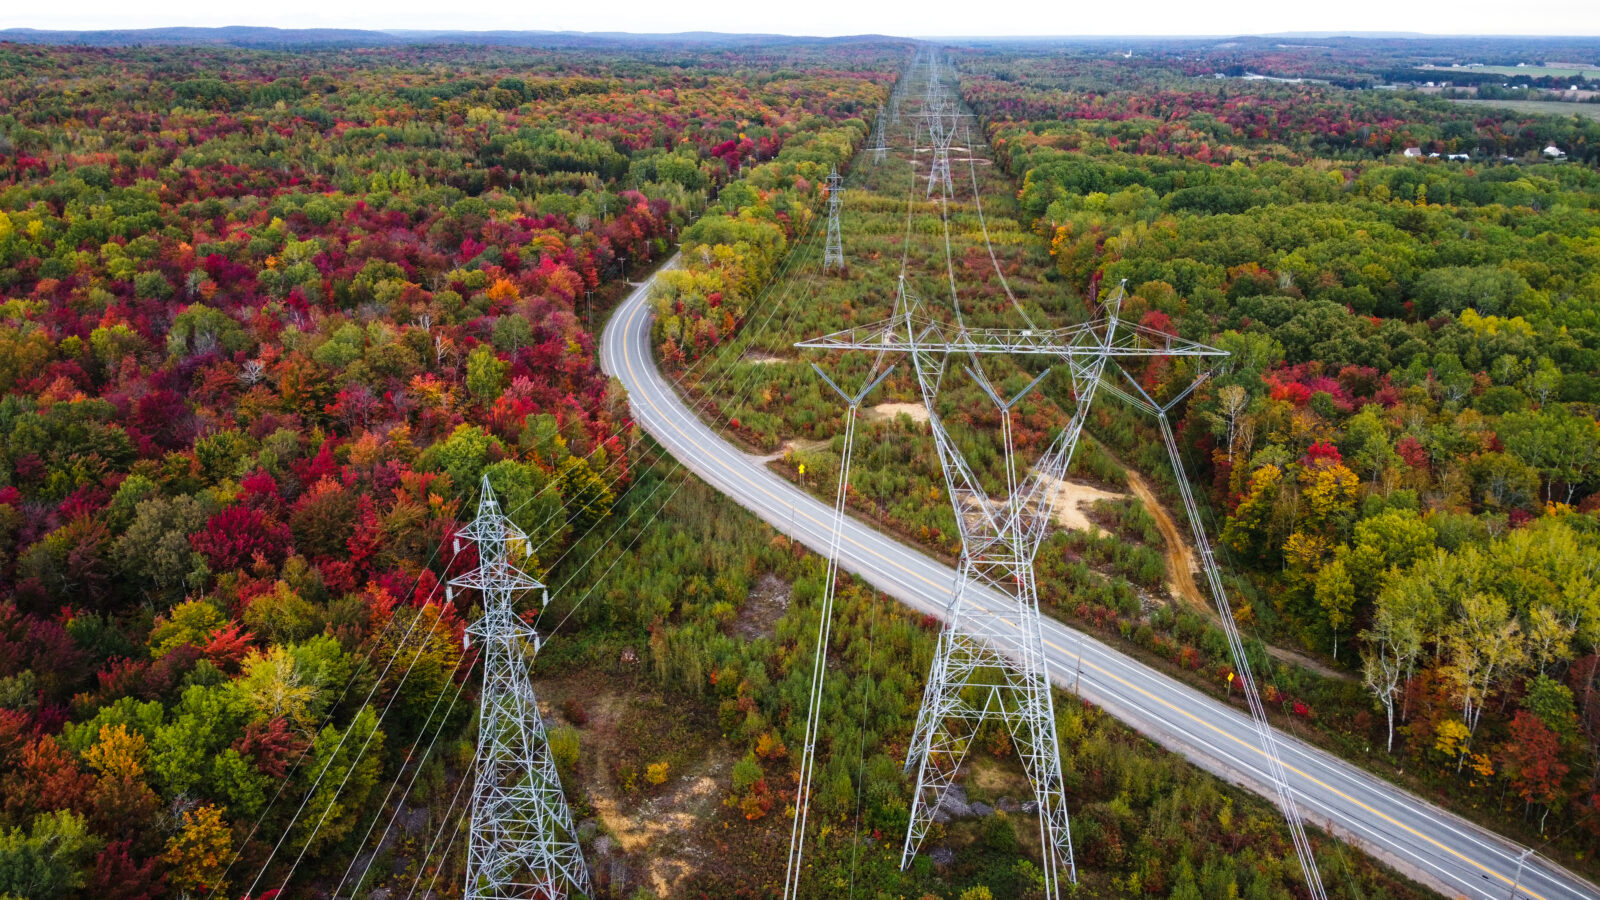 Image showing a large electricity pylon and a road in a forest.